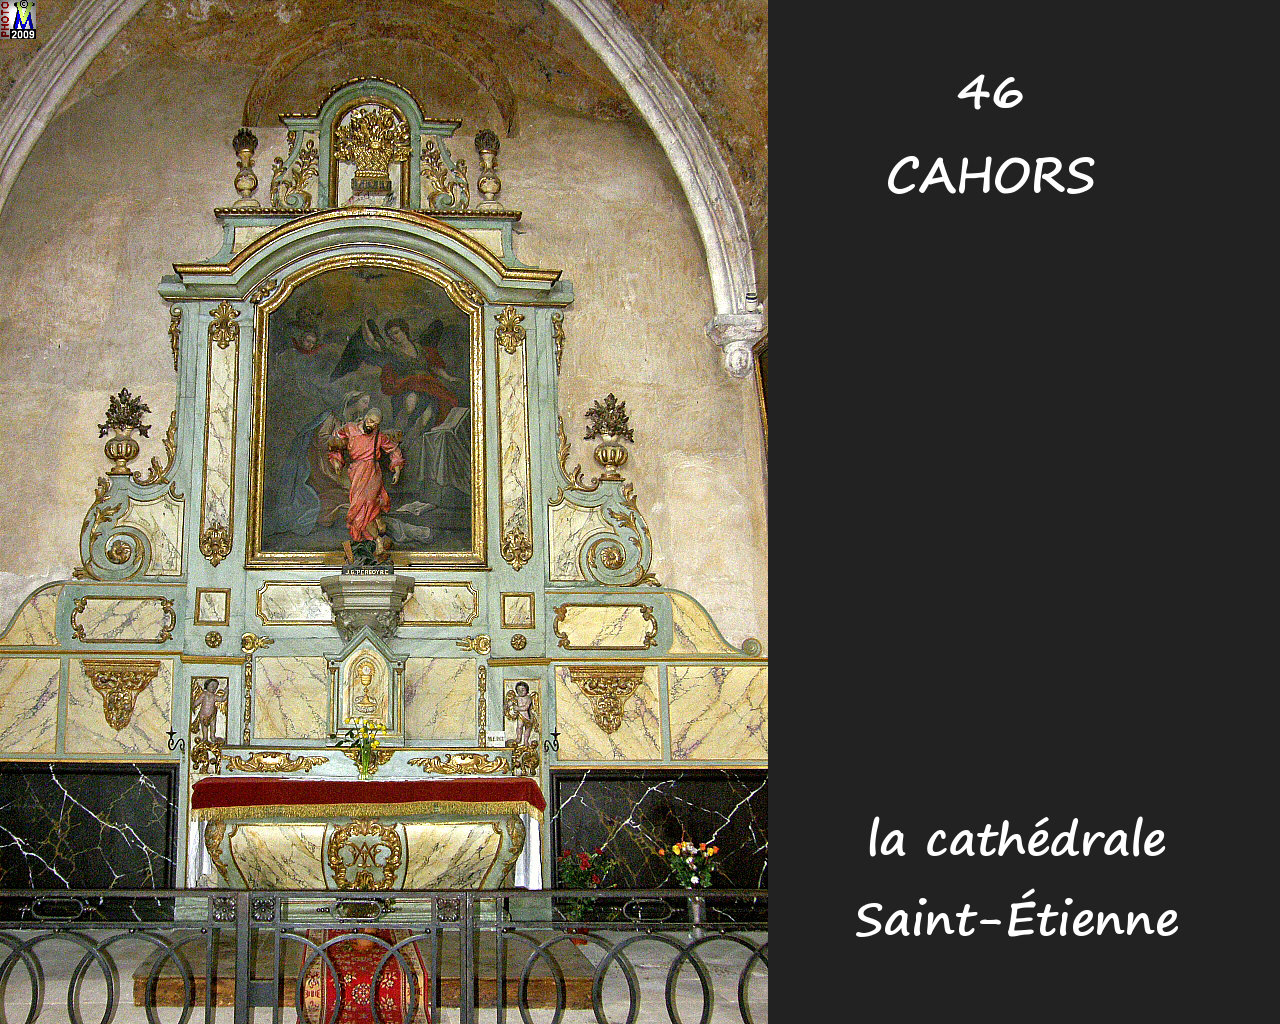 46CAHORS_cathedrale_224.jpg